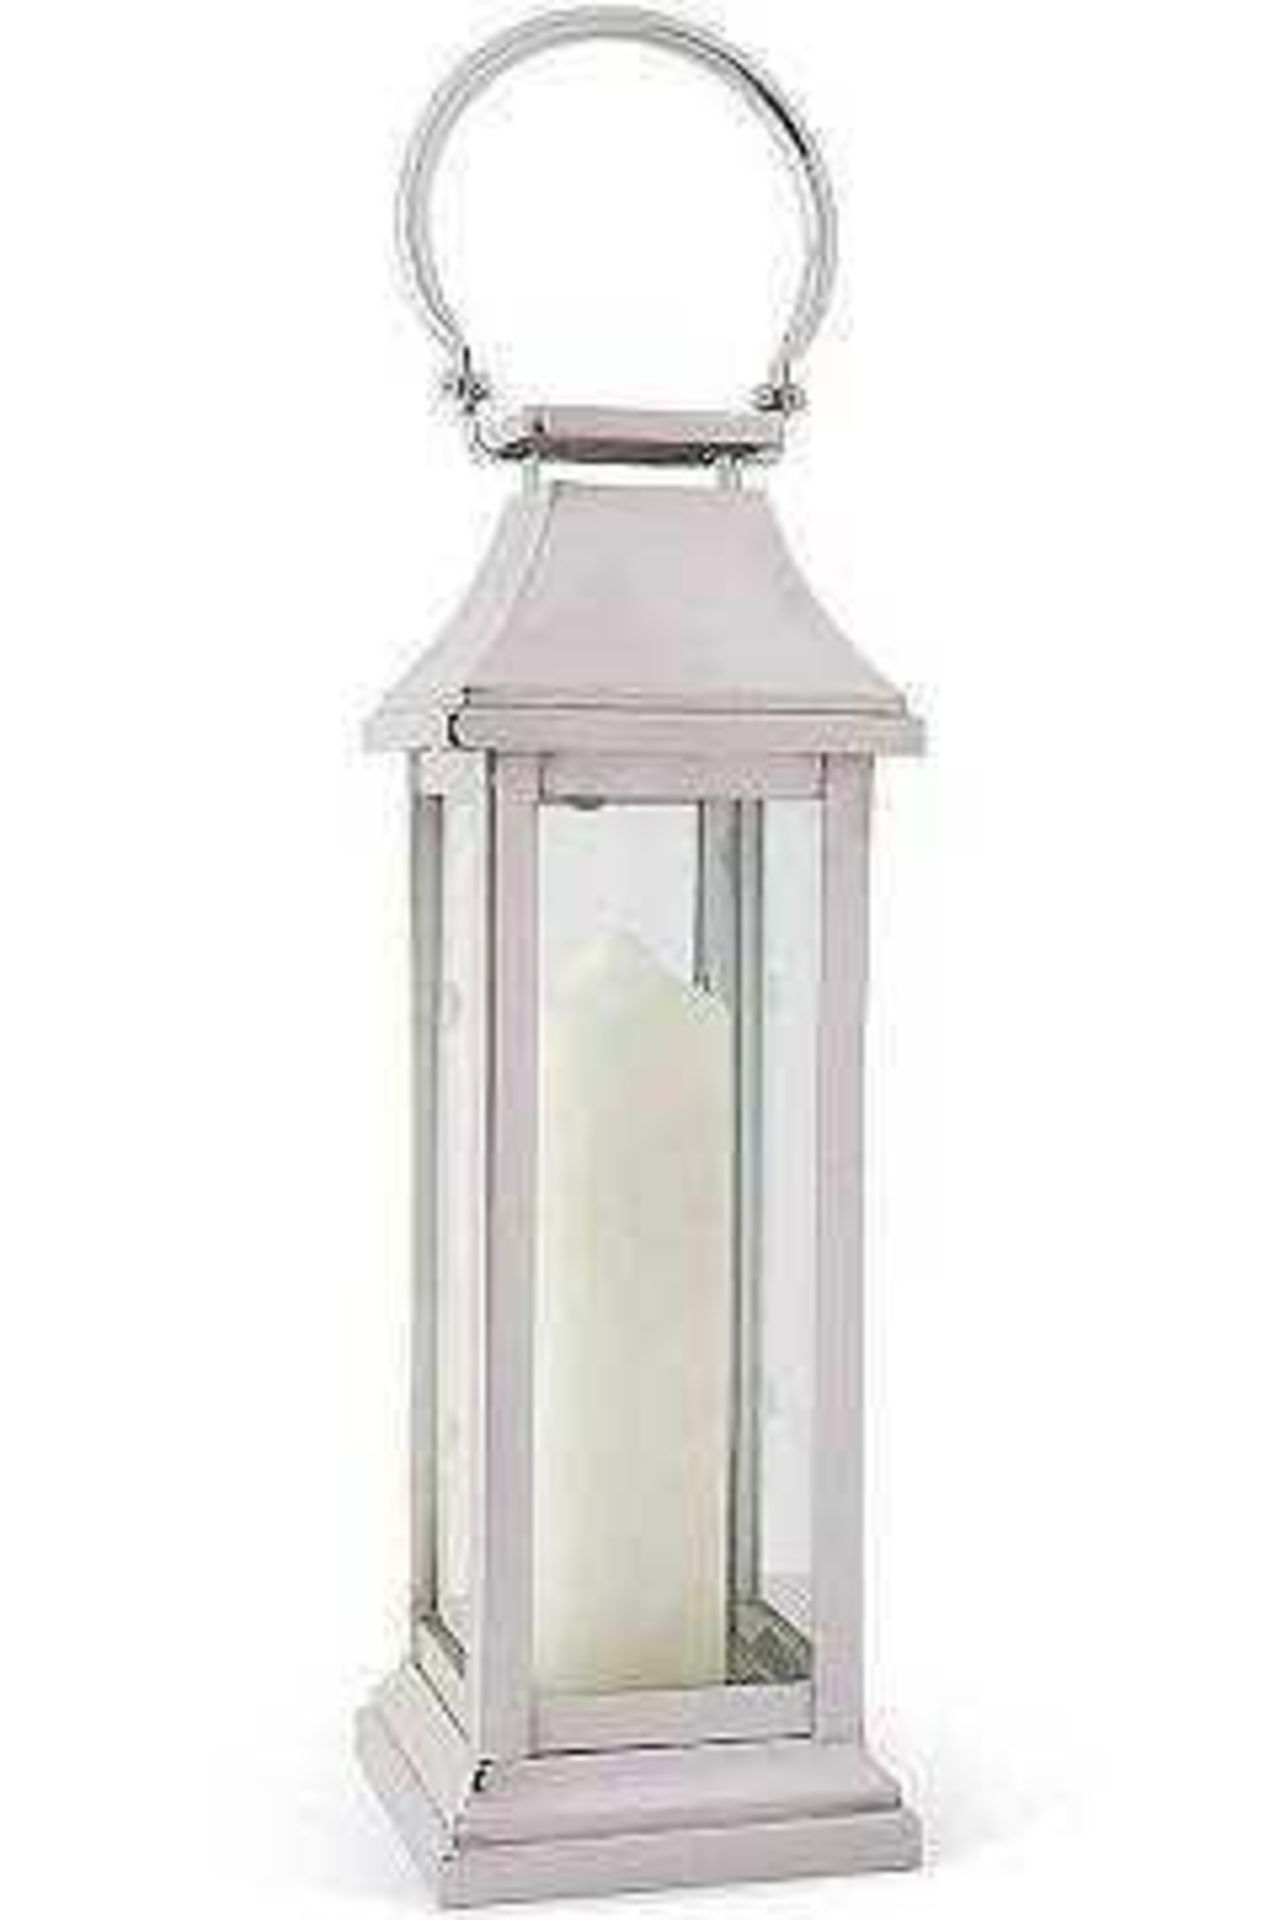 (Jb) RRP £100 Lot To Contain 1 Boxed Culinary Concepts Large Station Lantern Model No Cc-5001-L